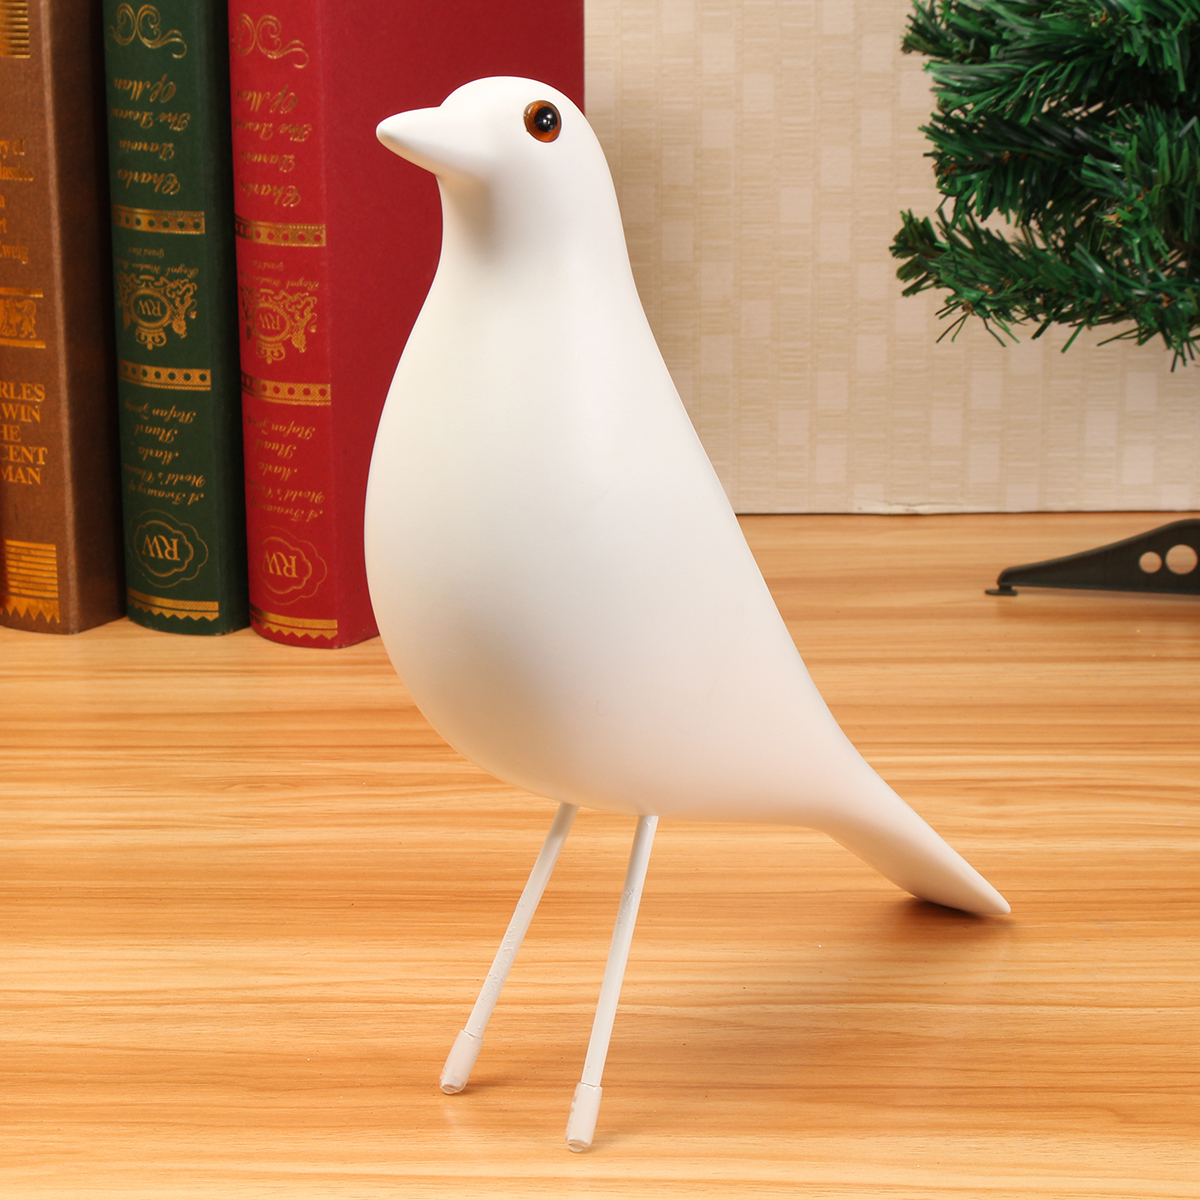 11-Bird-Desk-Ornament-House-Resin-Pigeon-Gift-Office-Home-Window-Table-Decorations-1641349-5